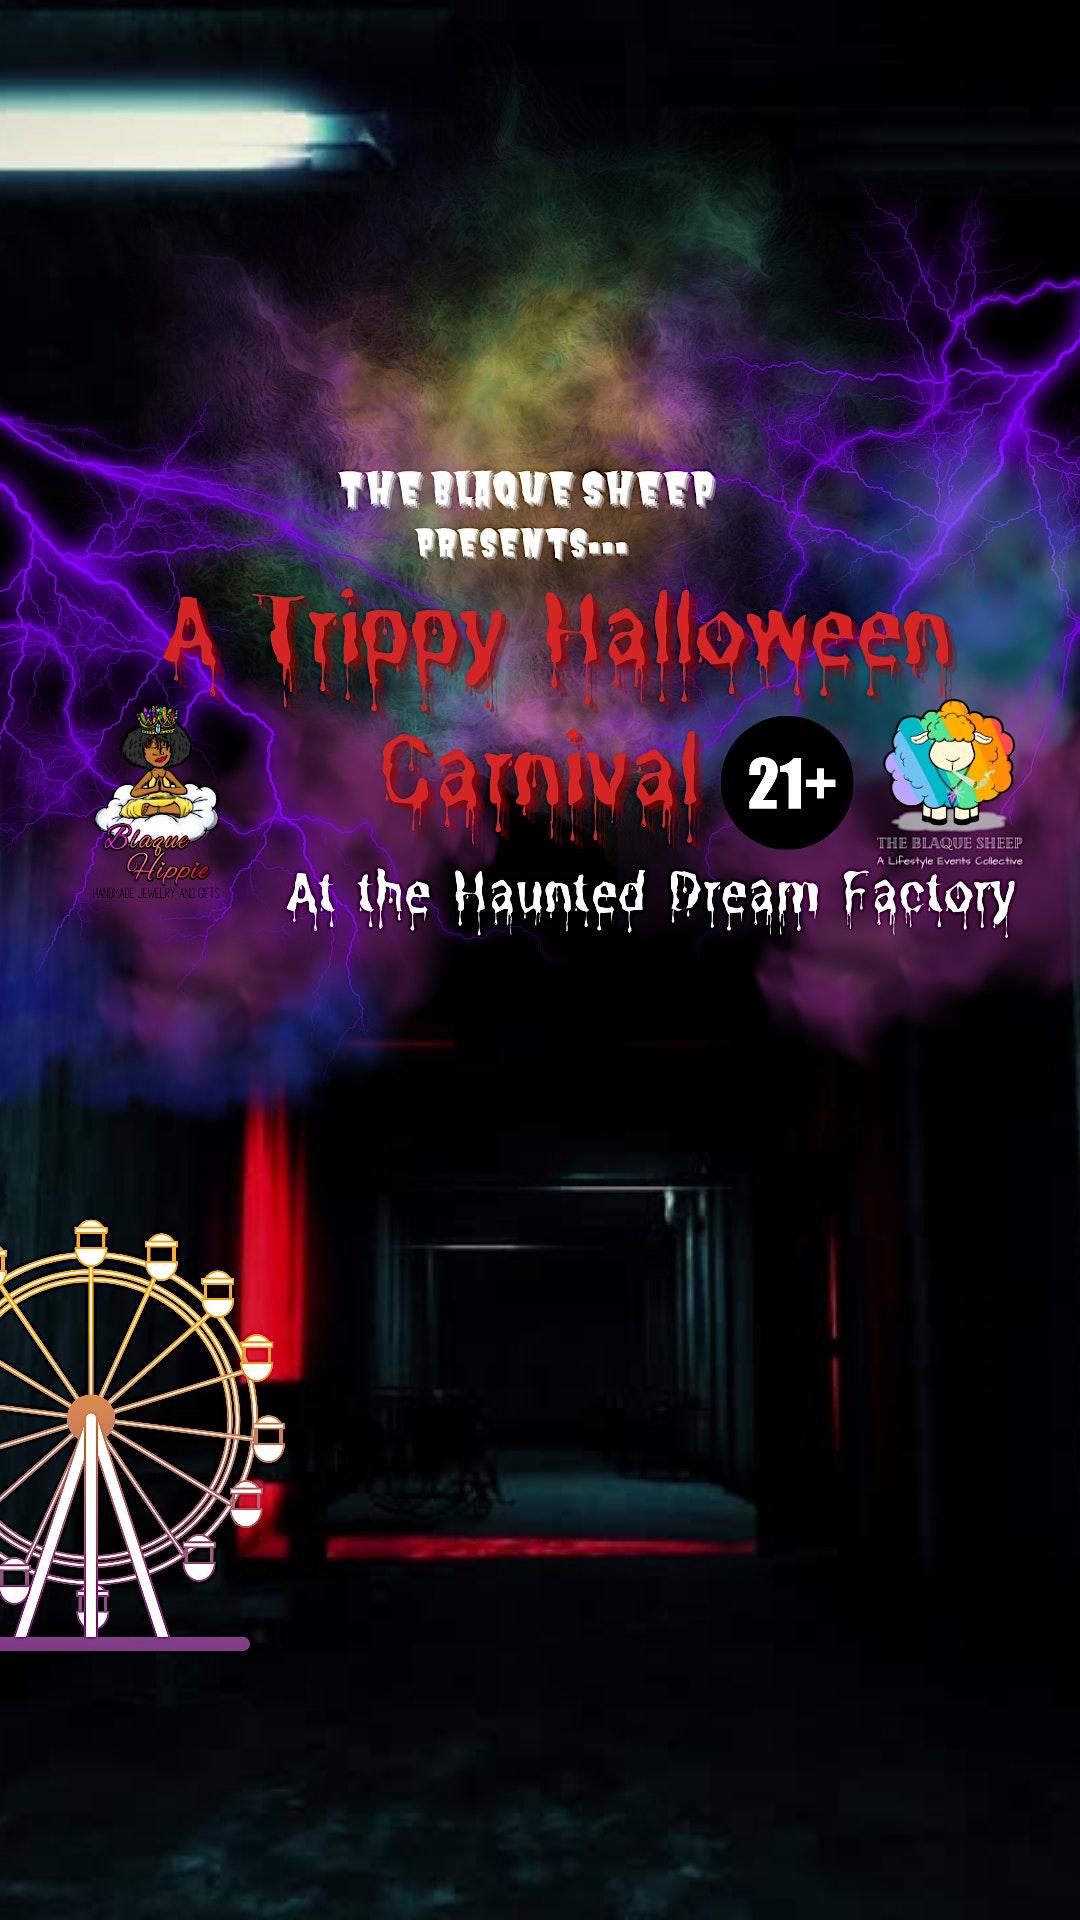 The Blaque Sheep Presents: A Trippy Halloween Carnival
Fri Oct 28, 7:00 PM - Fri Oct 28, 11:30 PM
in 9 days